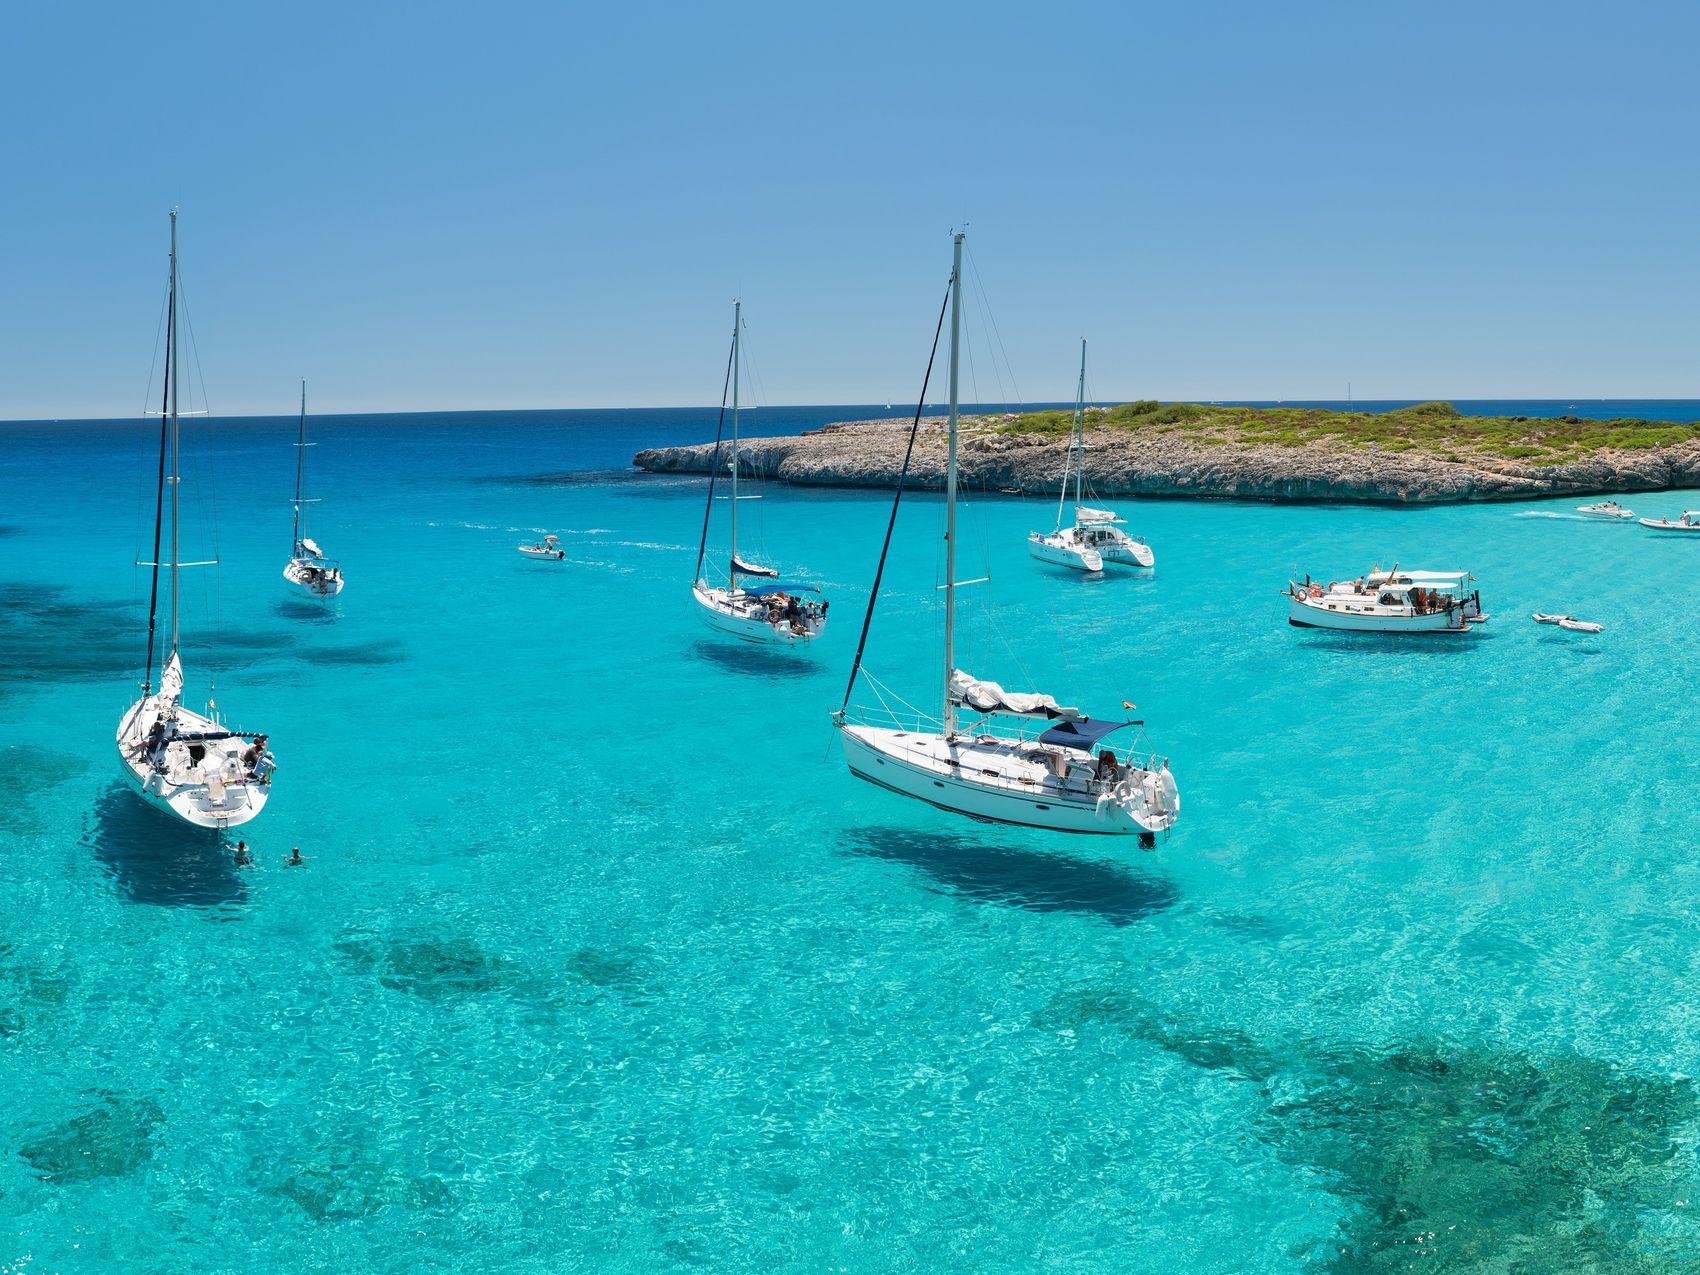 Stable weather with long sunny days — 4 reasons to sail around Mallorca